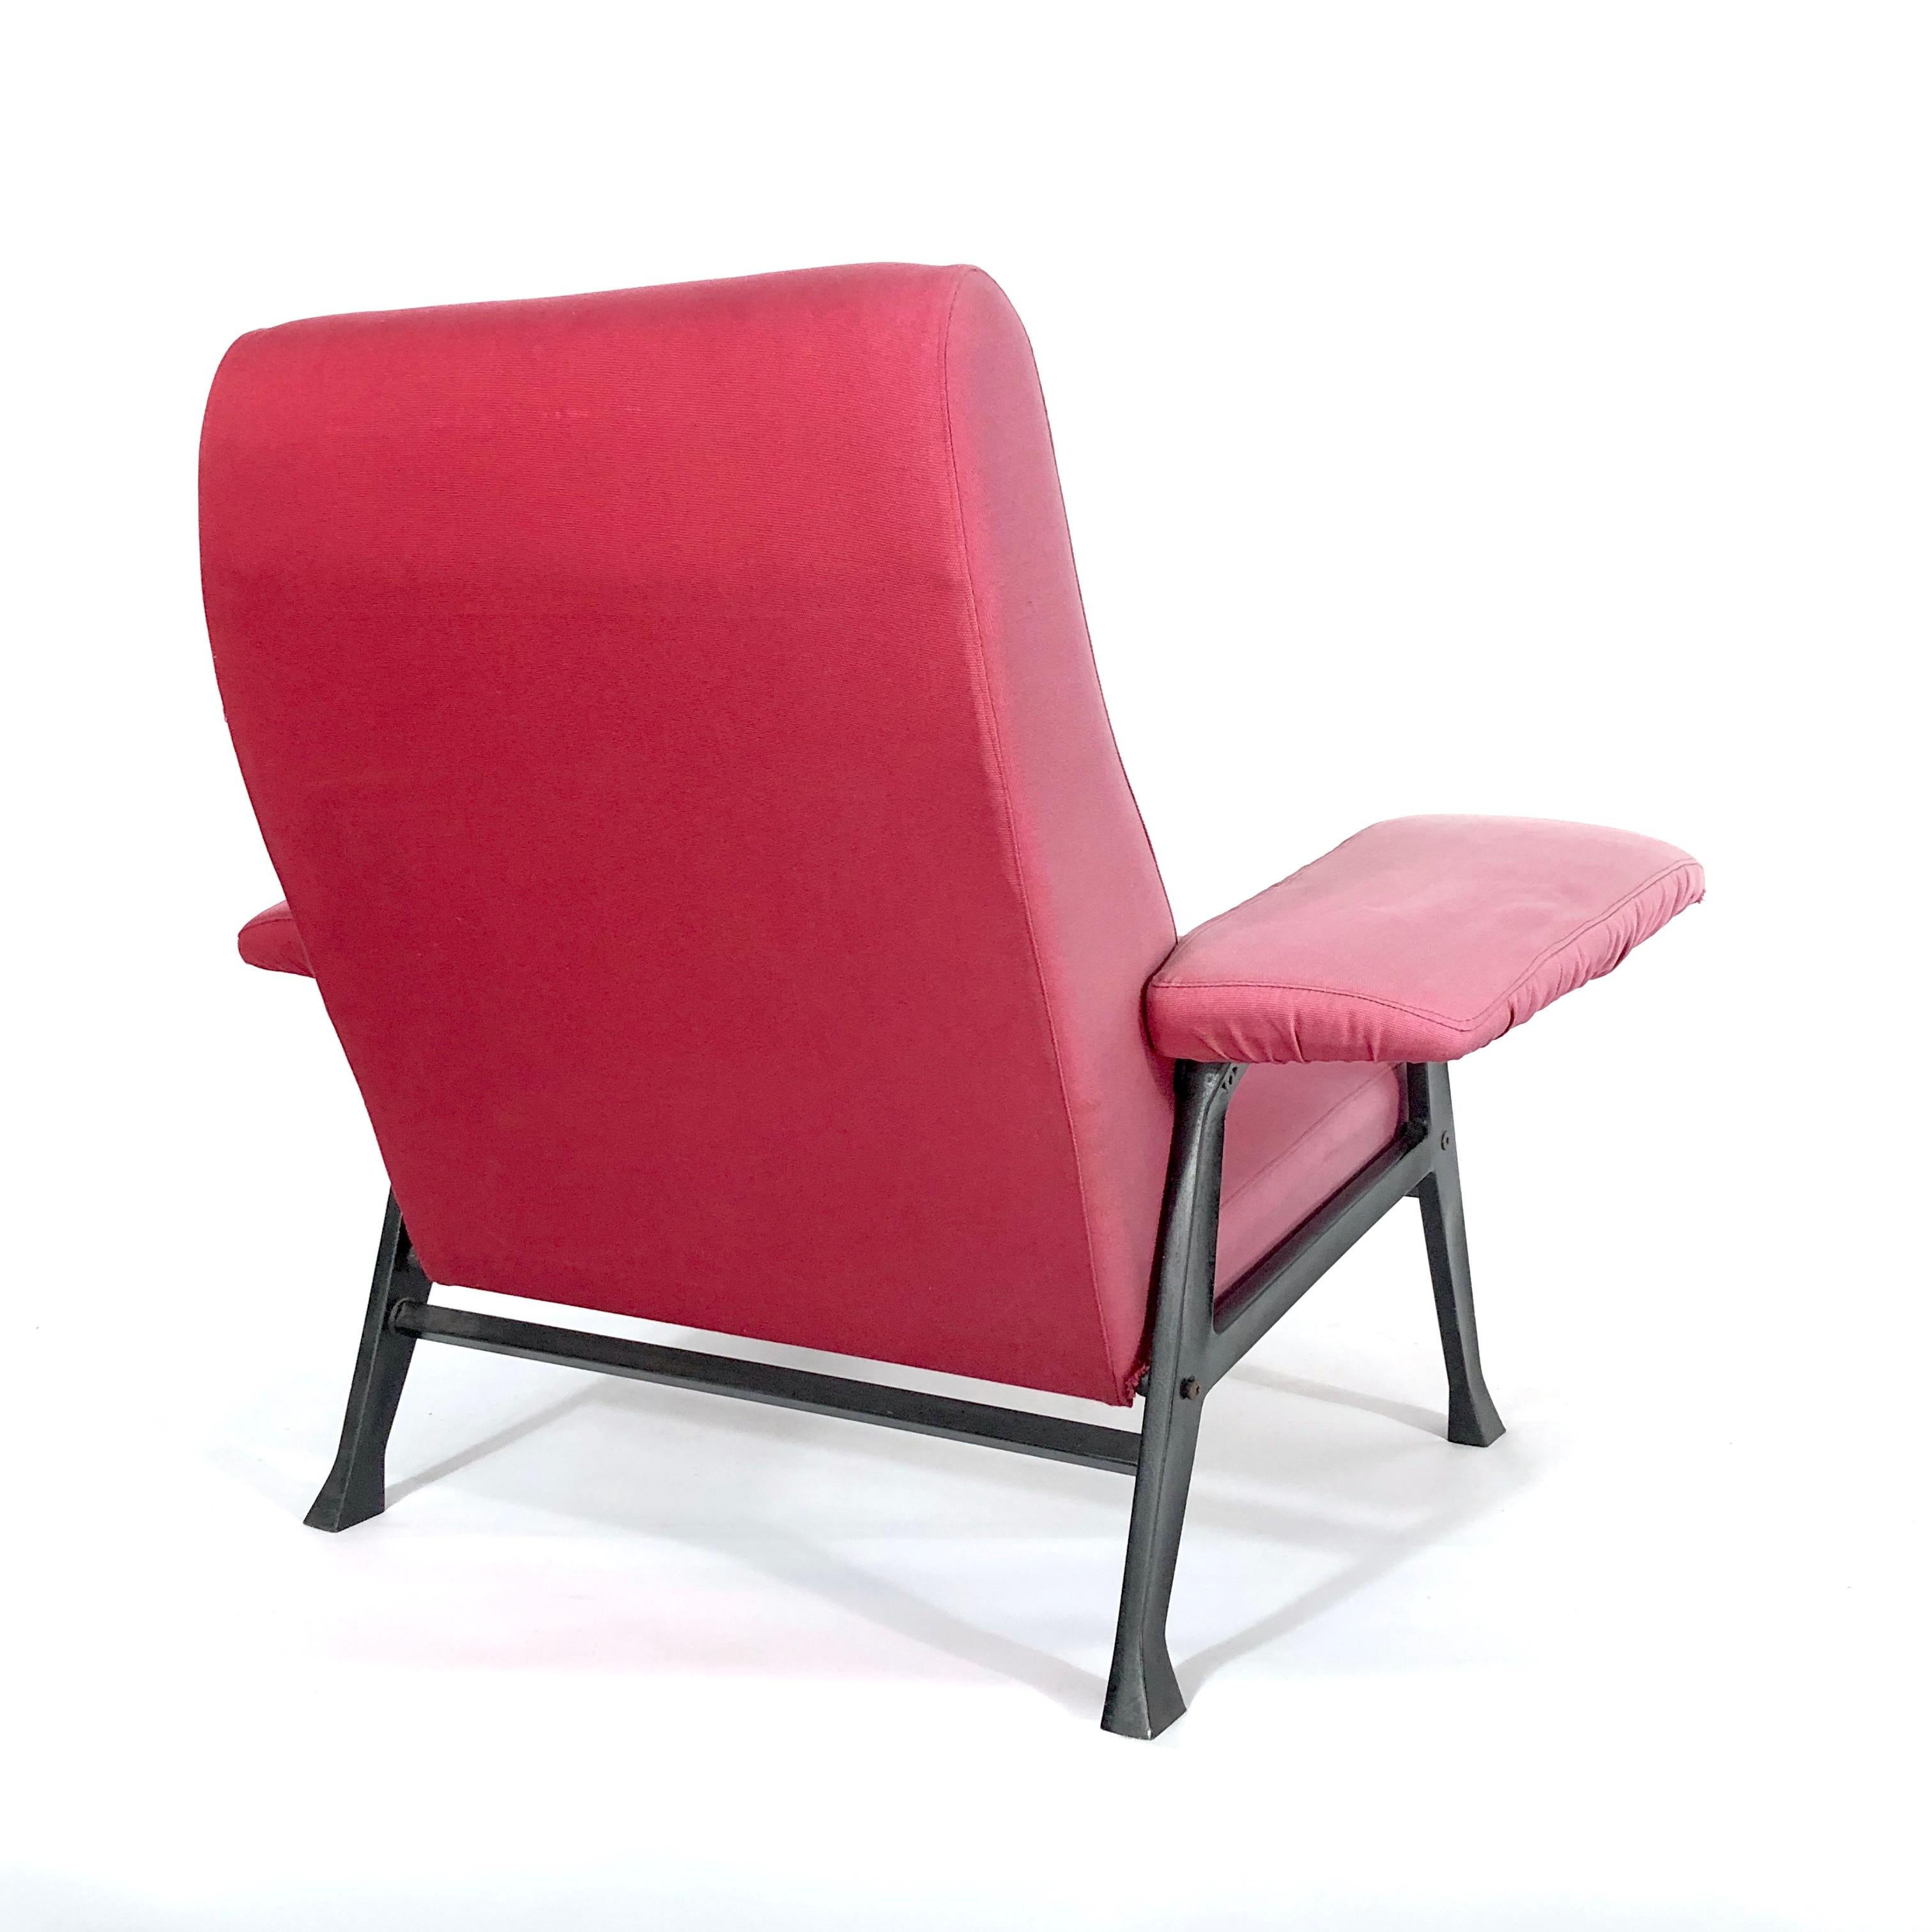 Roberto Menghi, 1st Edition Hall Armchair by Arflex, 1950s For Sale 6